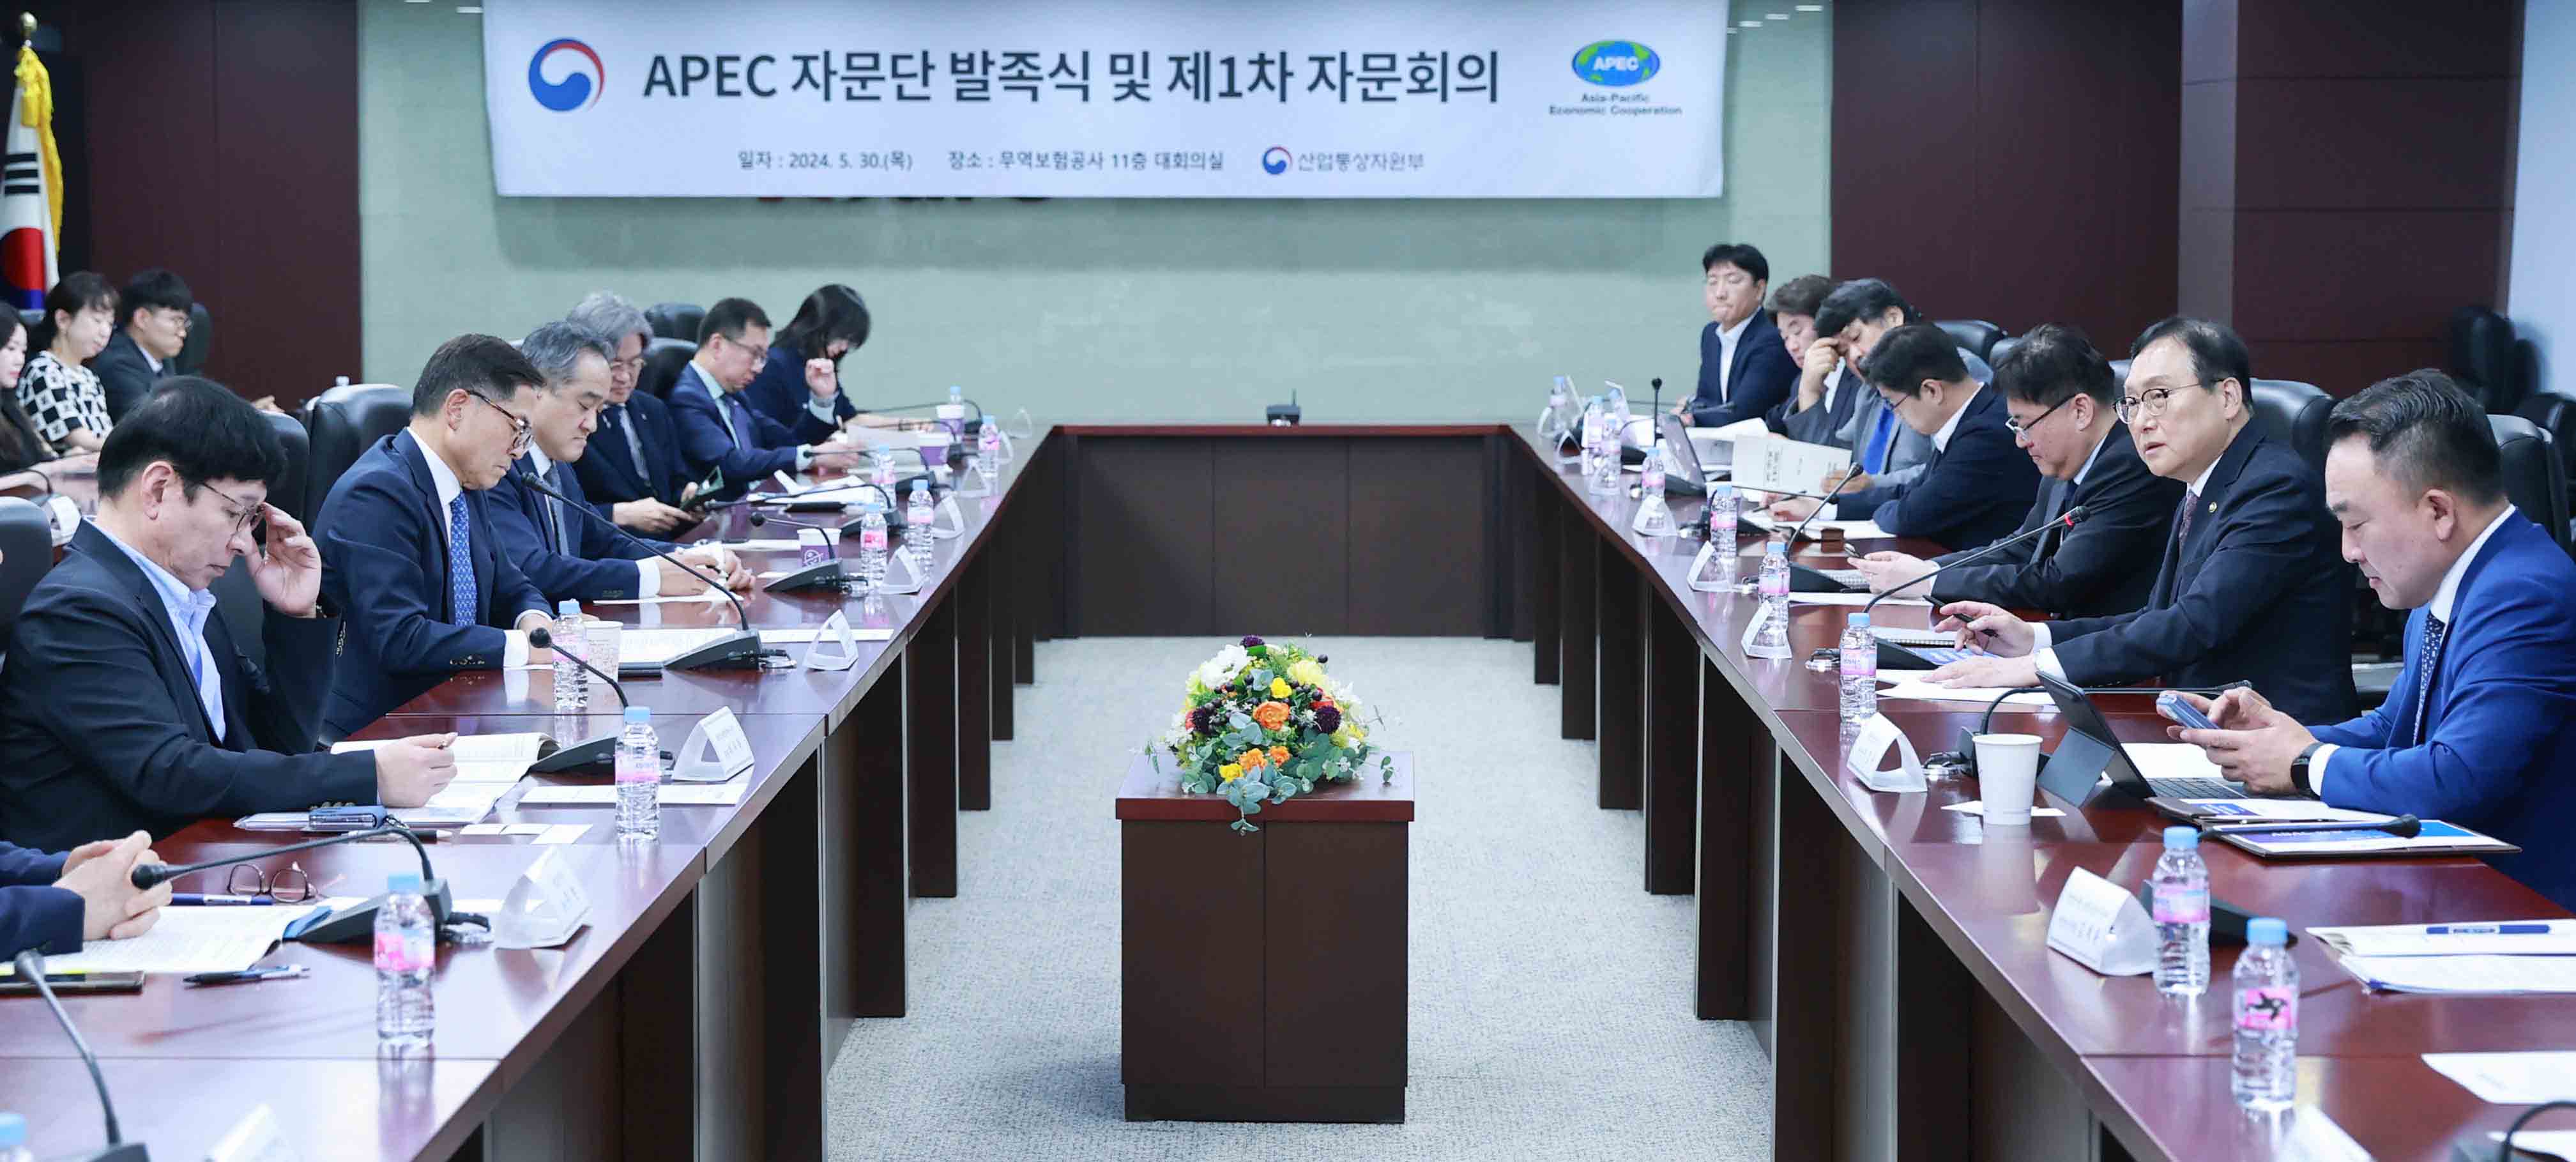 Trade Minister chairs inaugural meeting of APEC Advisory Group